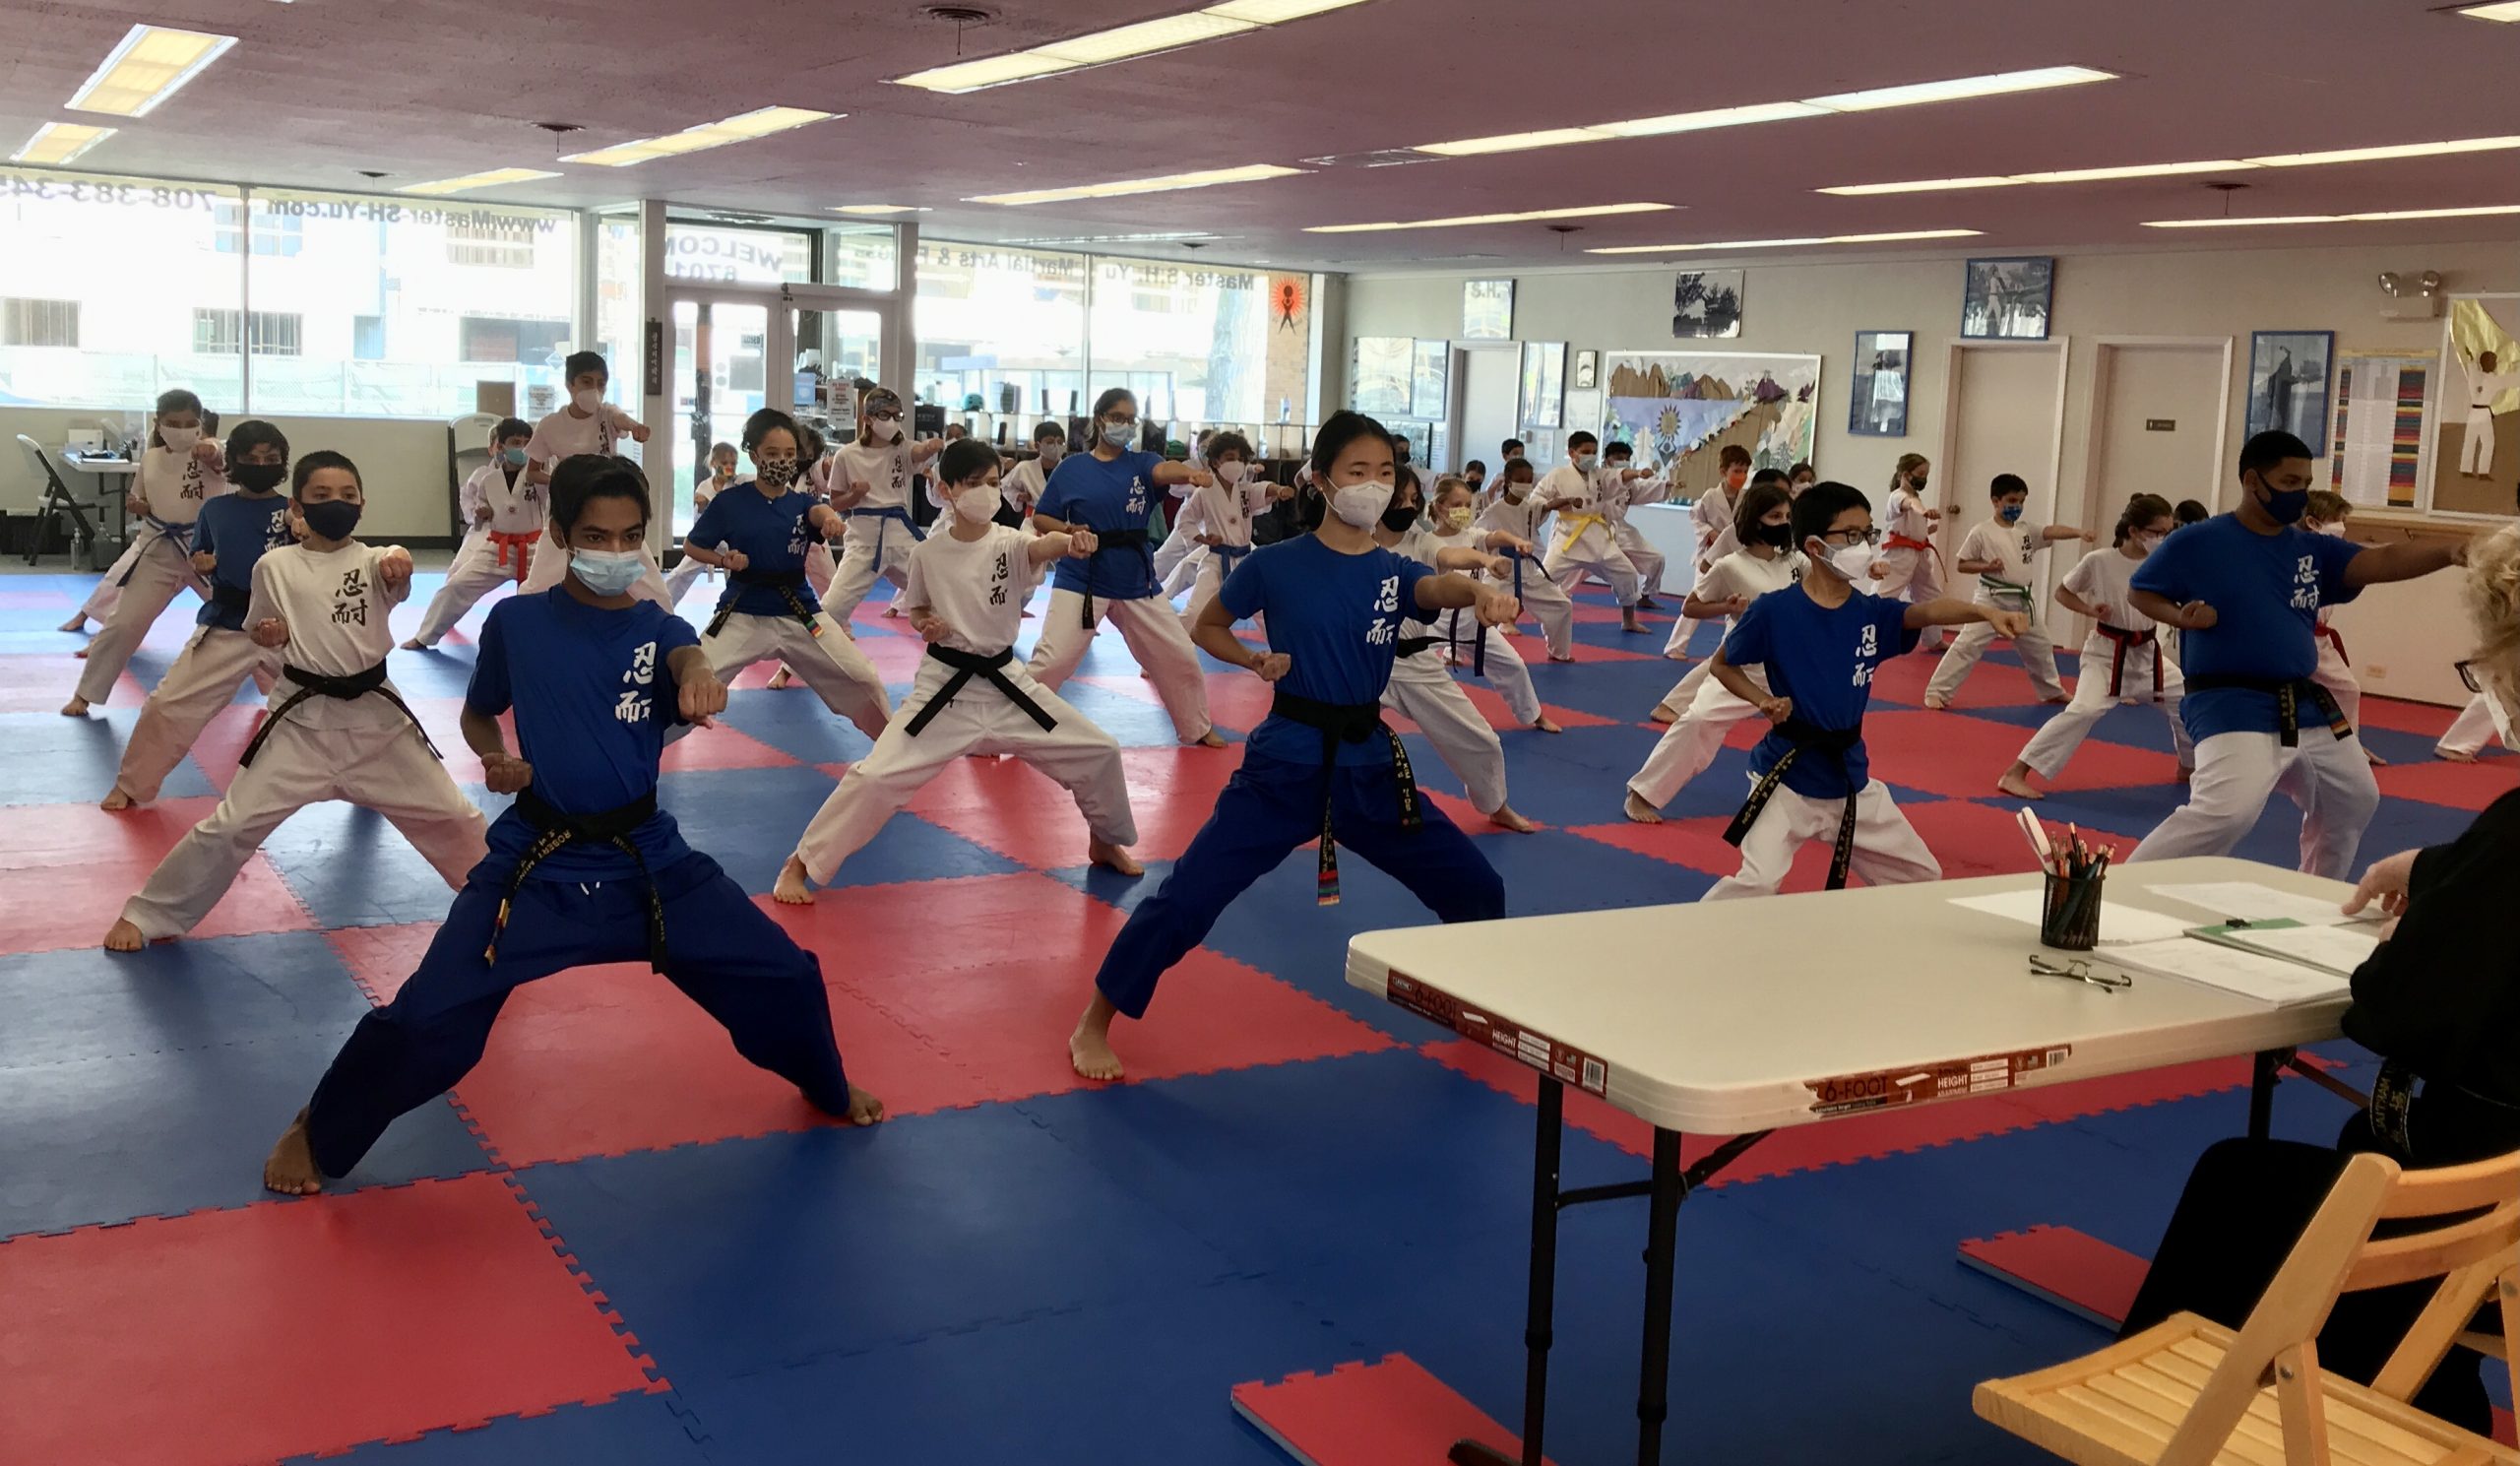 Martial arts karate class in action